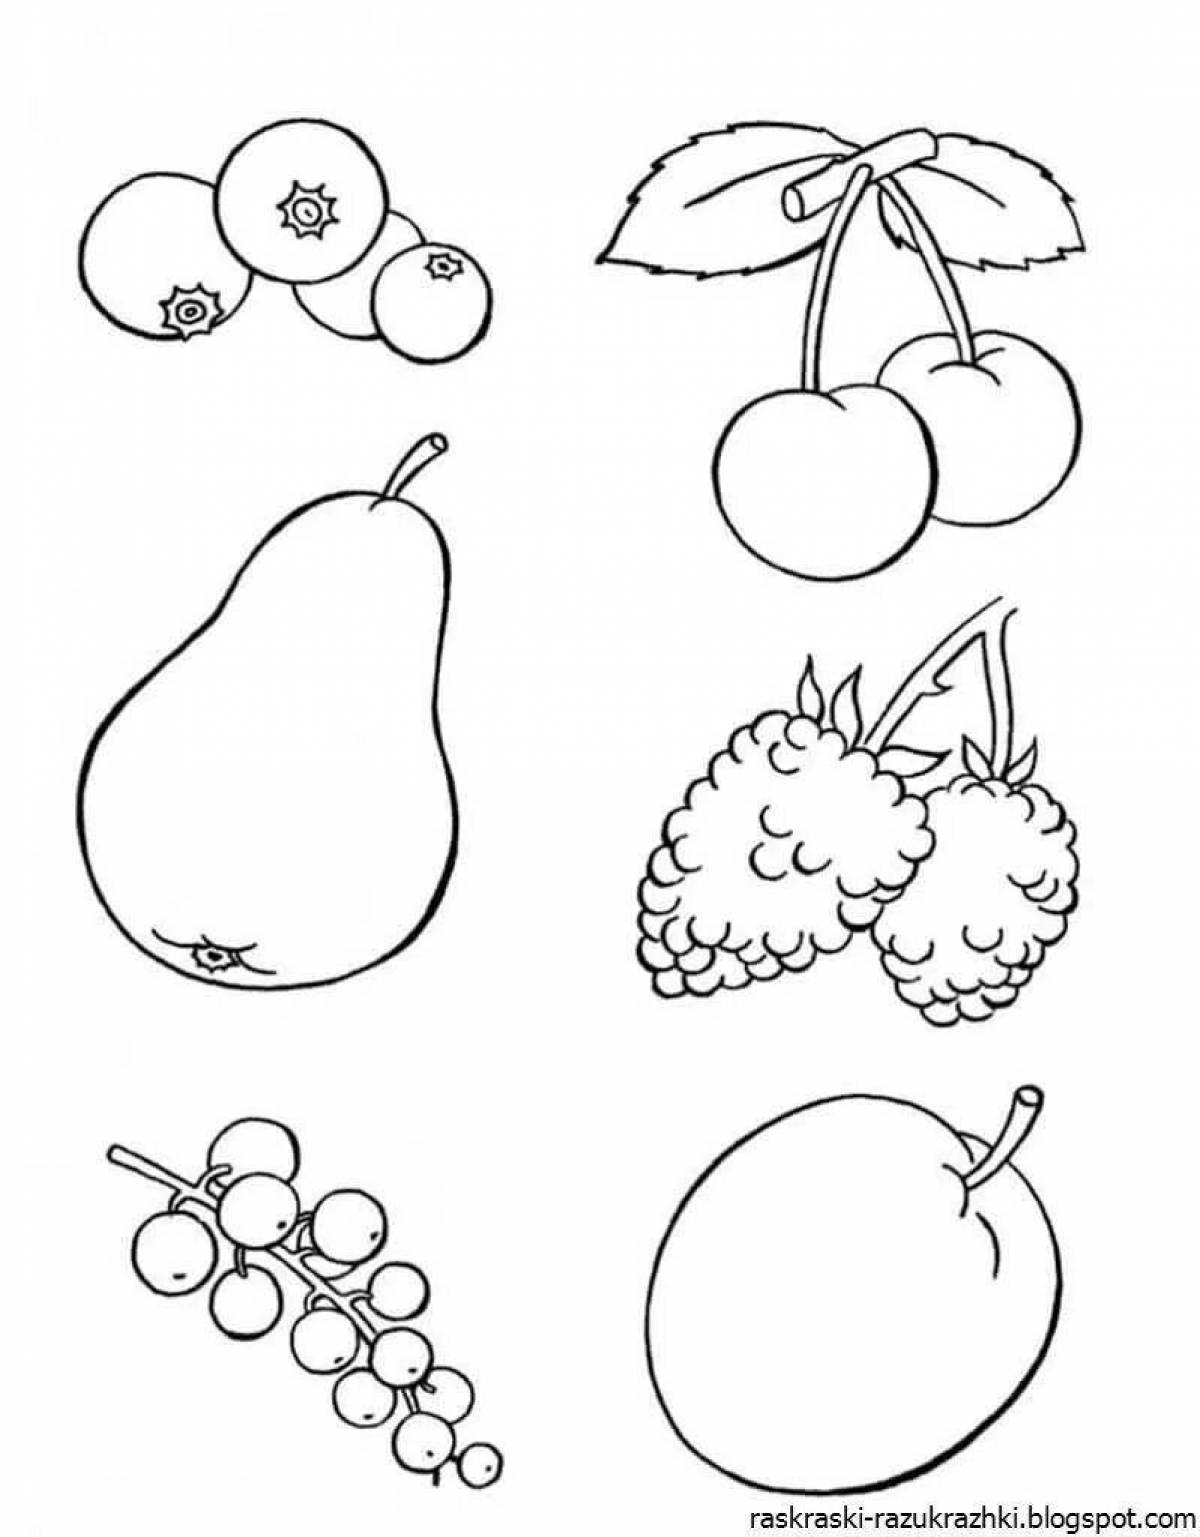 Friendly fruits and vegetables coloring book